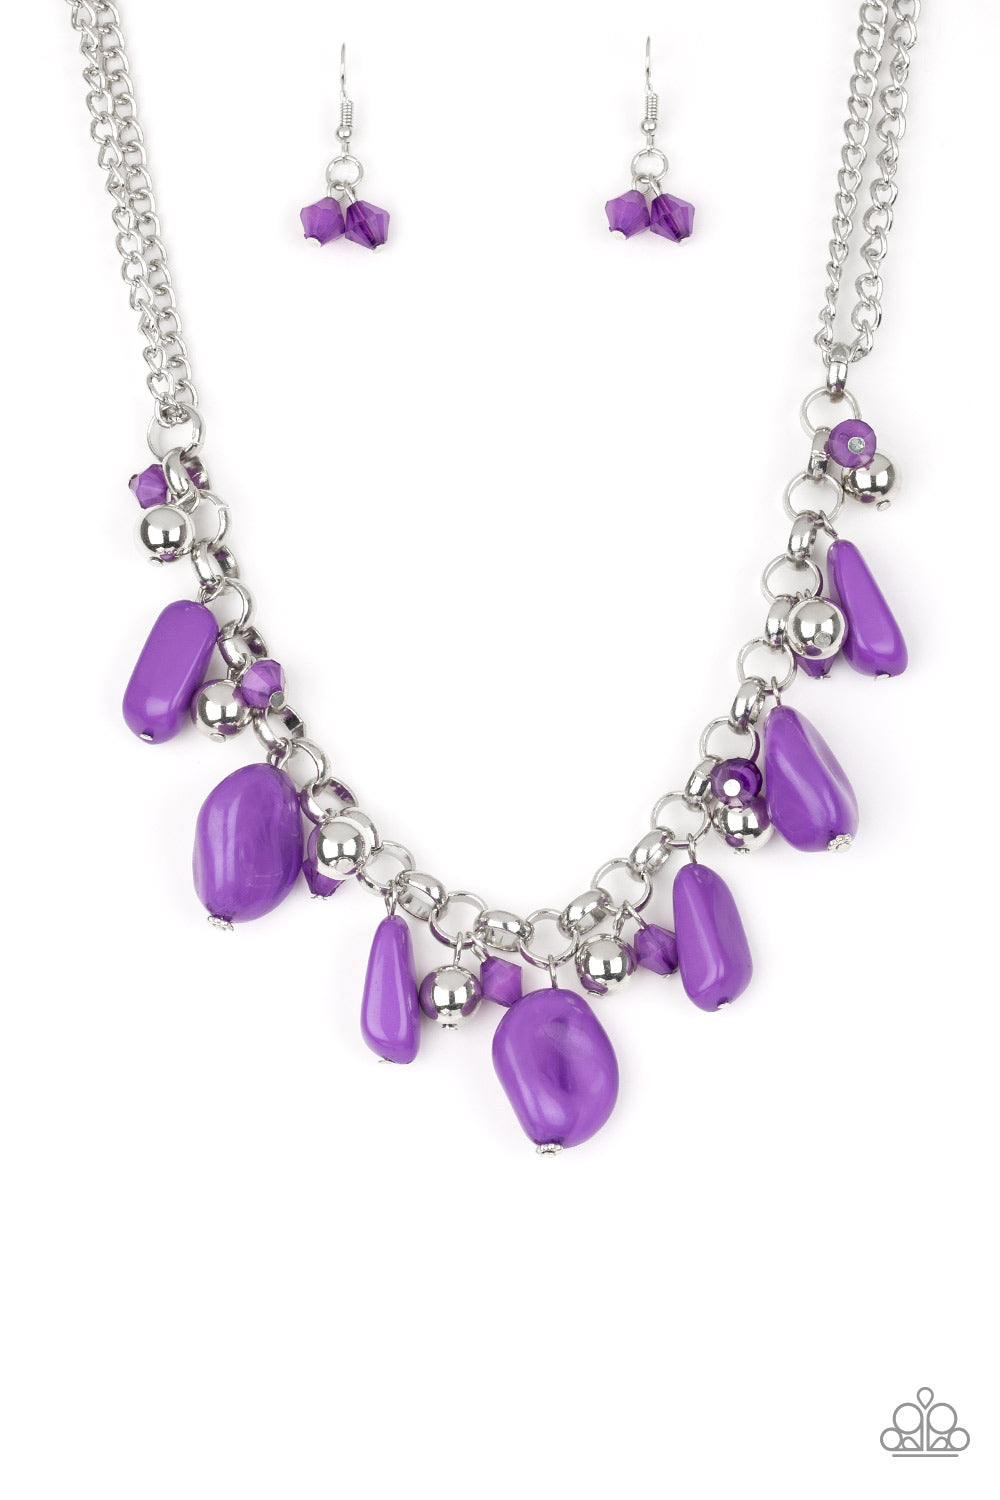 . Grand Canyon Grotto - Purple Necklace